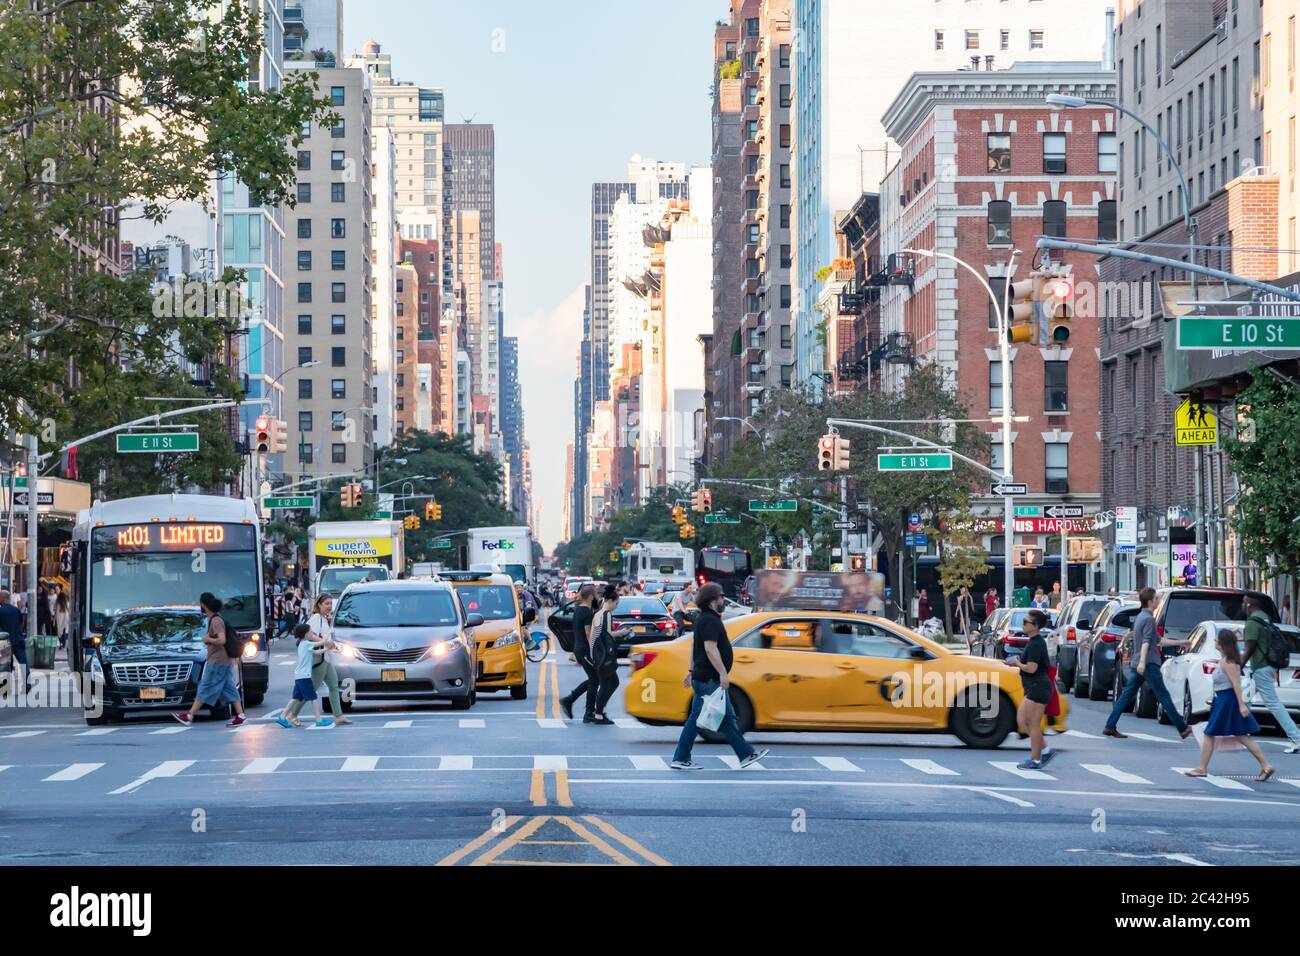 NEW YORK CITY, USA 2017: Busy people walk across an intersection at rush hour on 3rd Avenue in front of the cars stopped at a traffic light in Manhatt Stock Photo